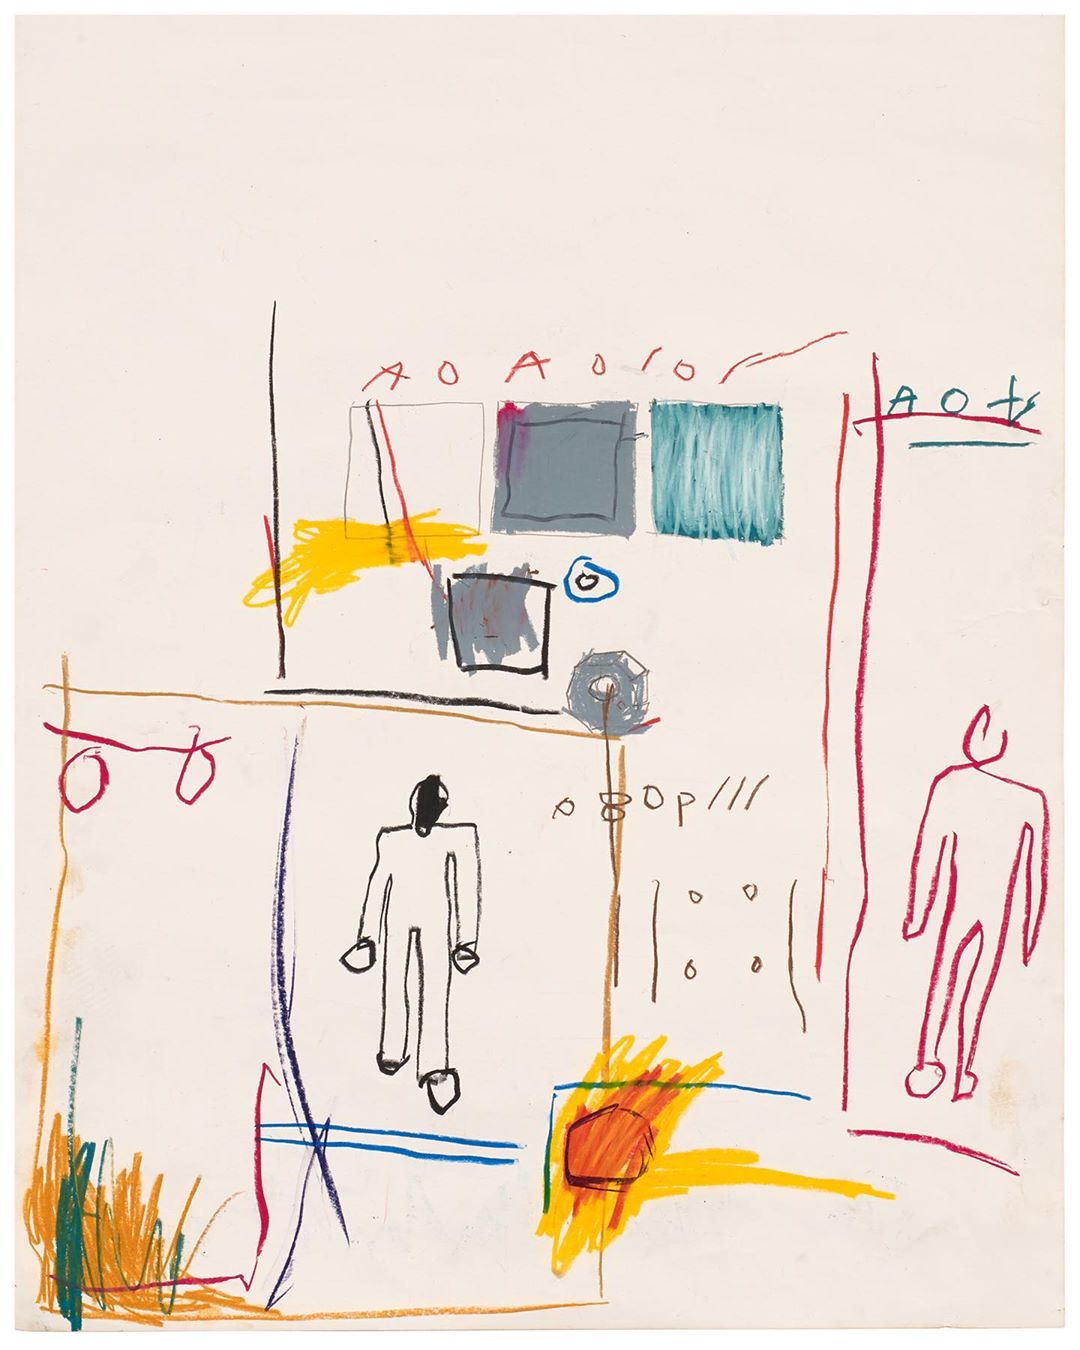 Coach - Exhilarating. Brilliant. Revolutionary. Those are just some of the words used to describe the works by American artist Jean-Michel Basquiat, who swept the New York art scene in the 1980s. Work...